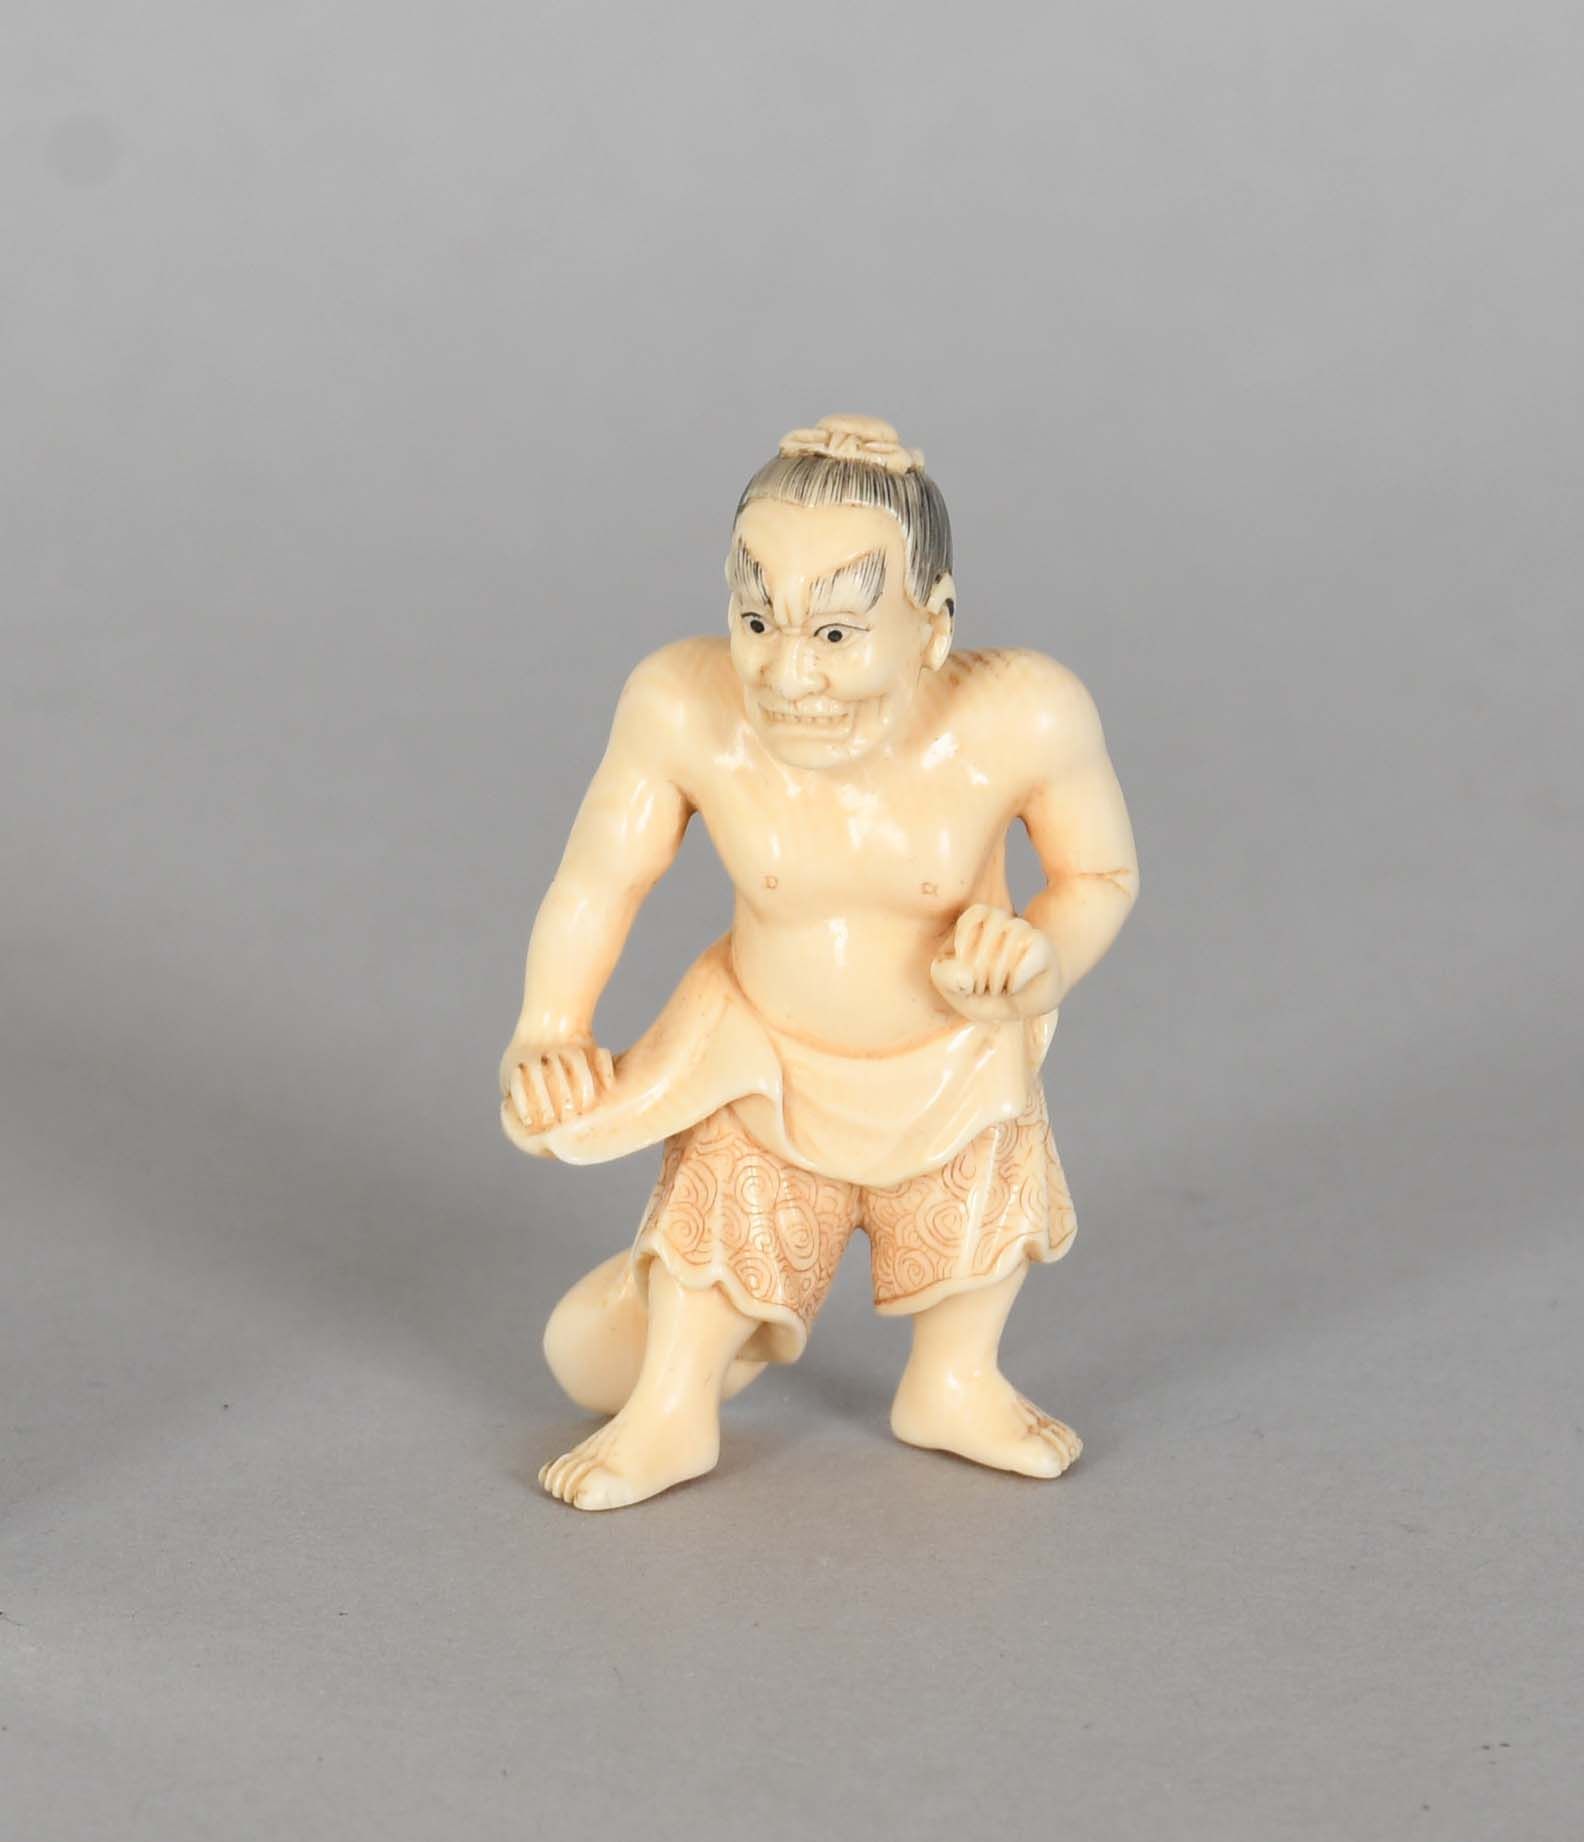 Null Taisho period, around 1920

Carved ivory netsuke : "An immortal". Signed.

&hellip;